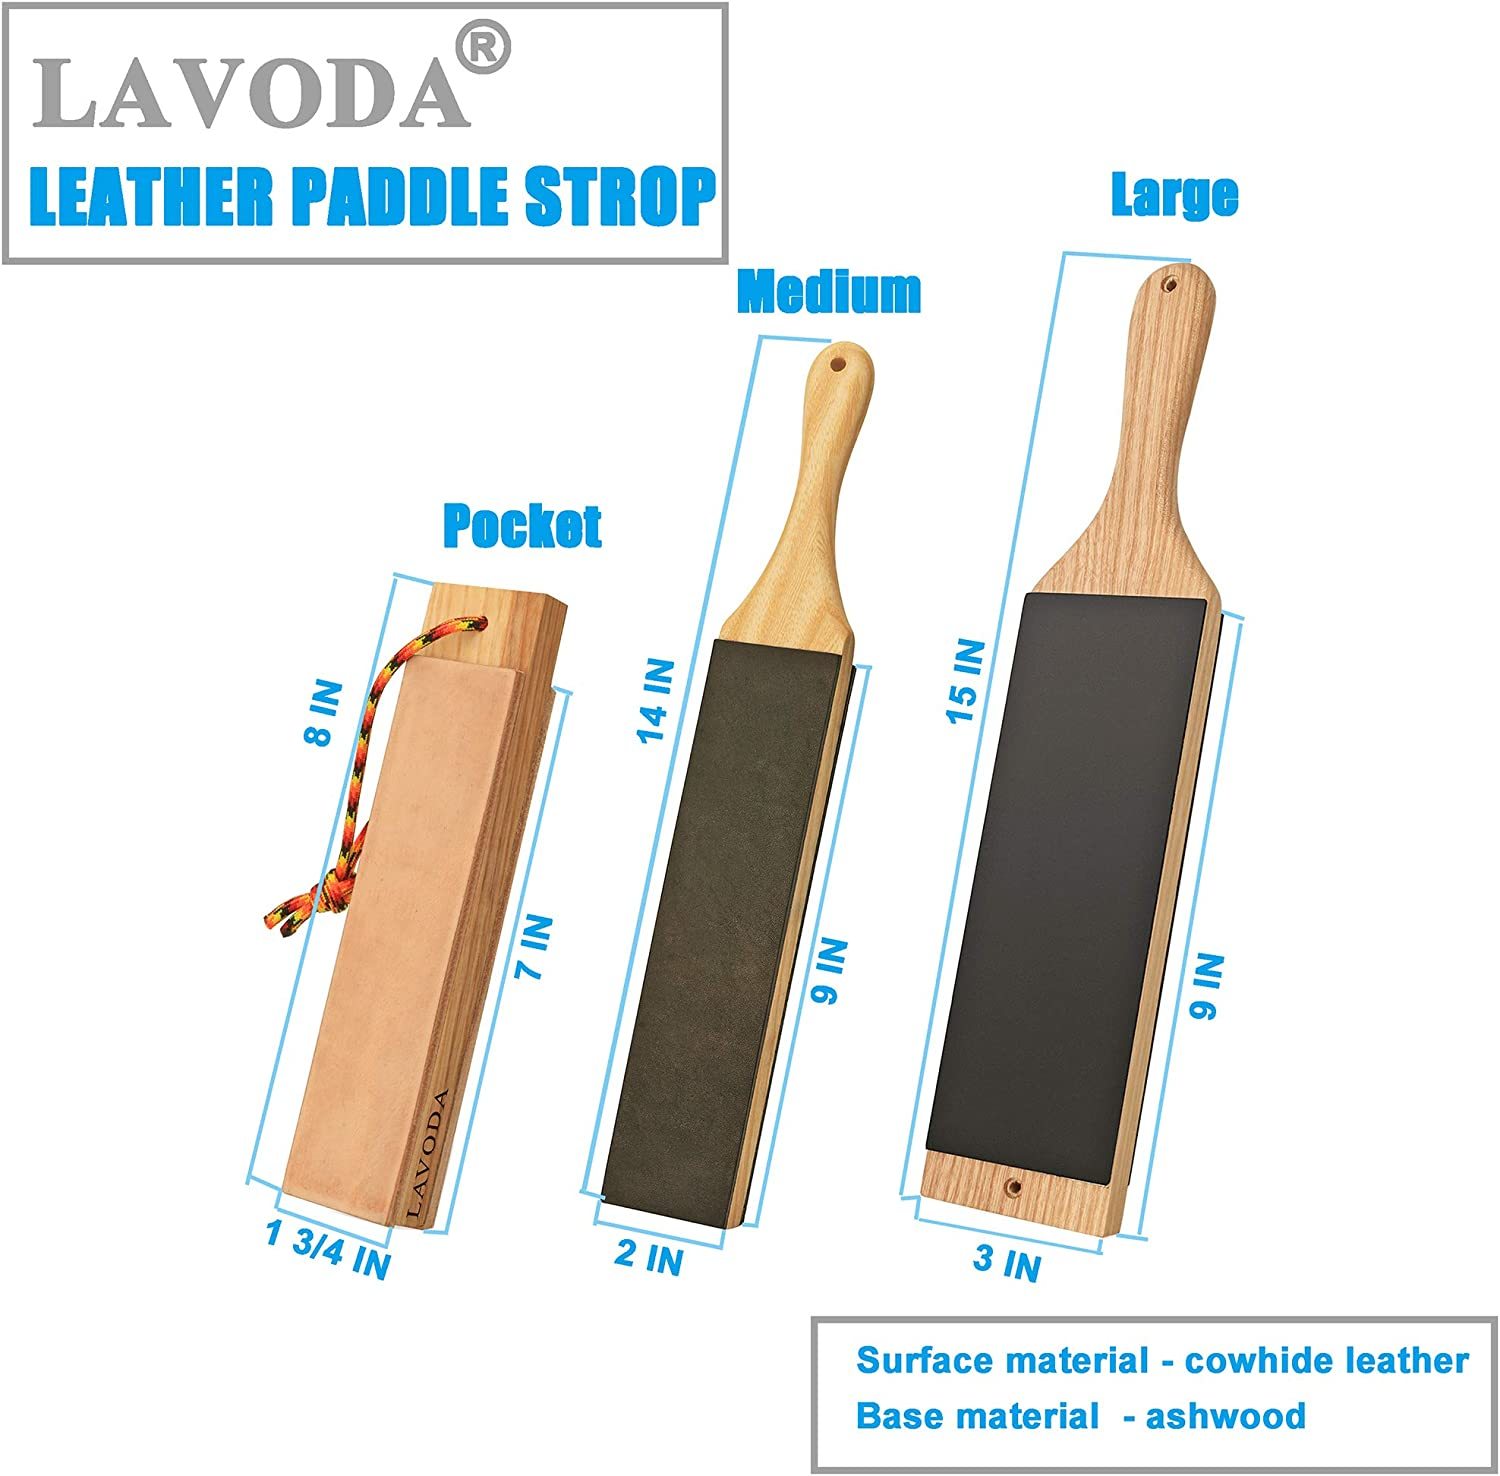 LAVODA Leather Strop Paddle Large for Knife Sharpening 3 by 15 Double-Sided